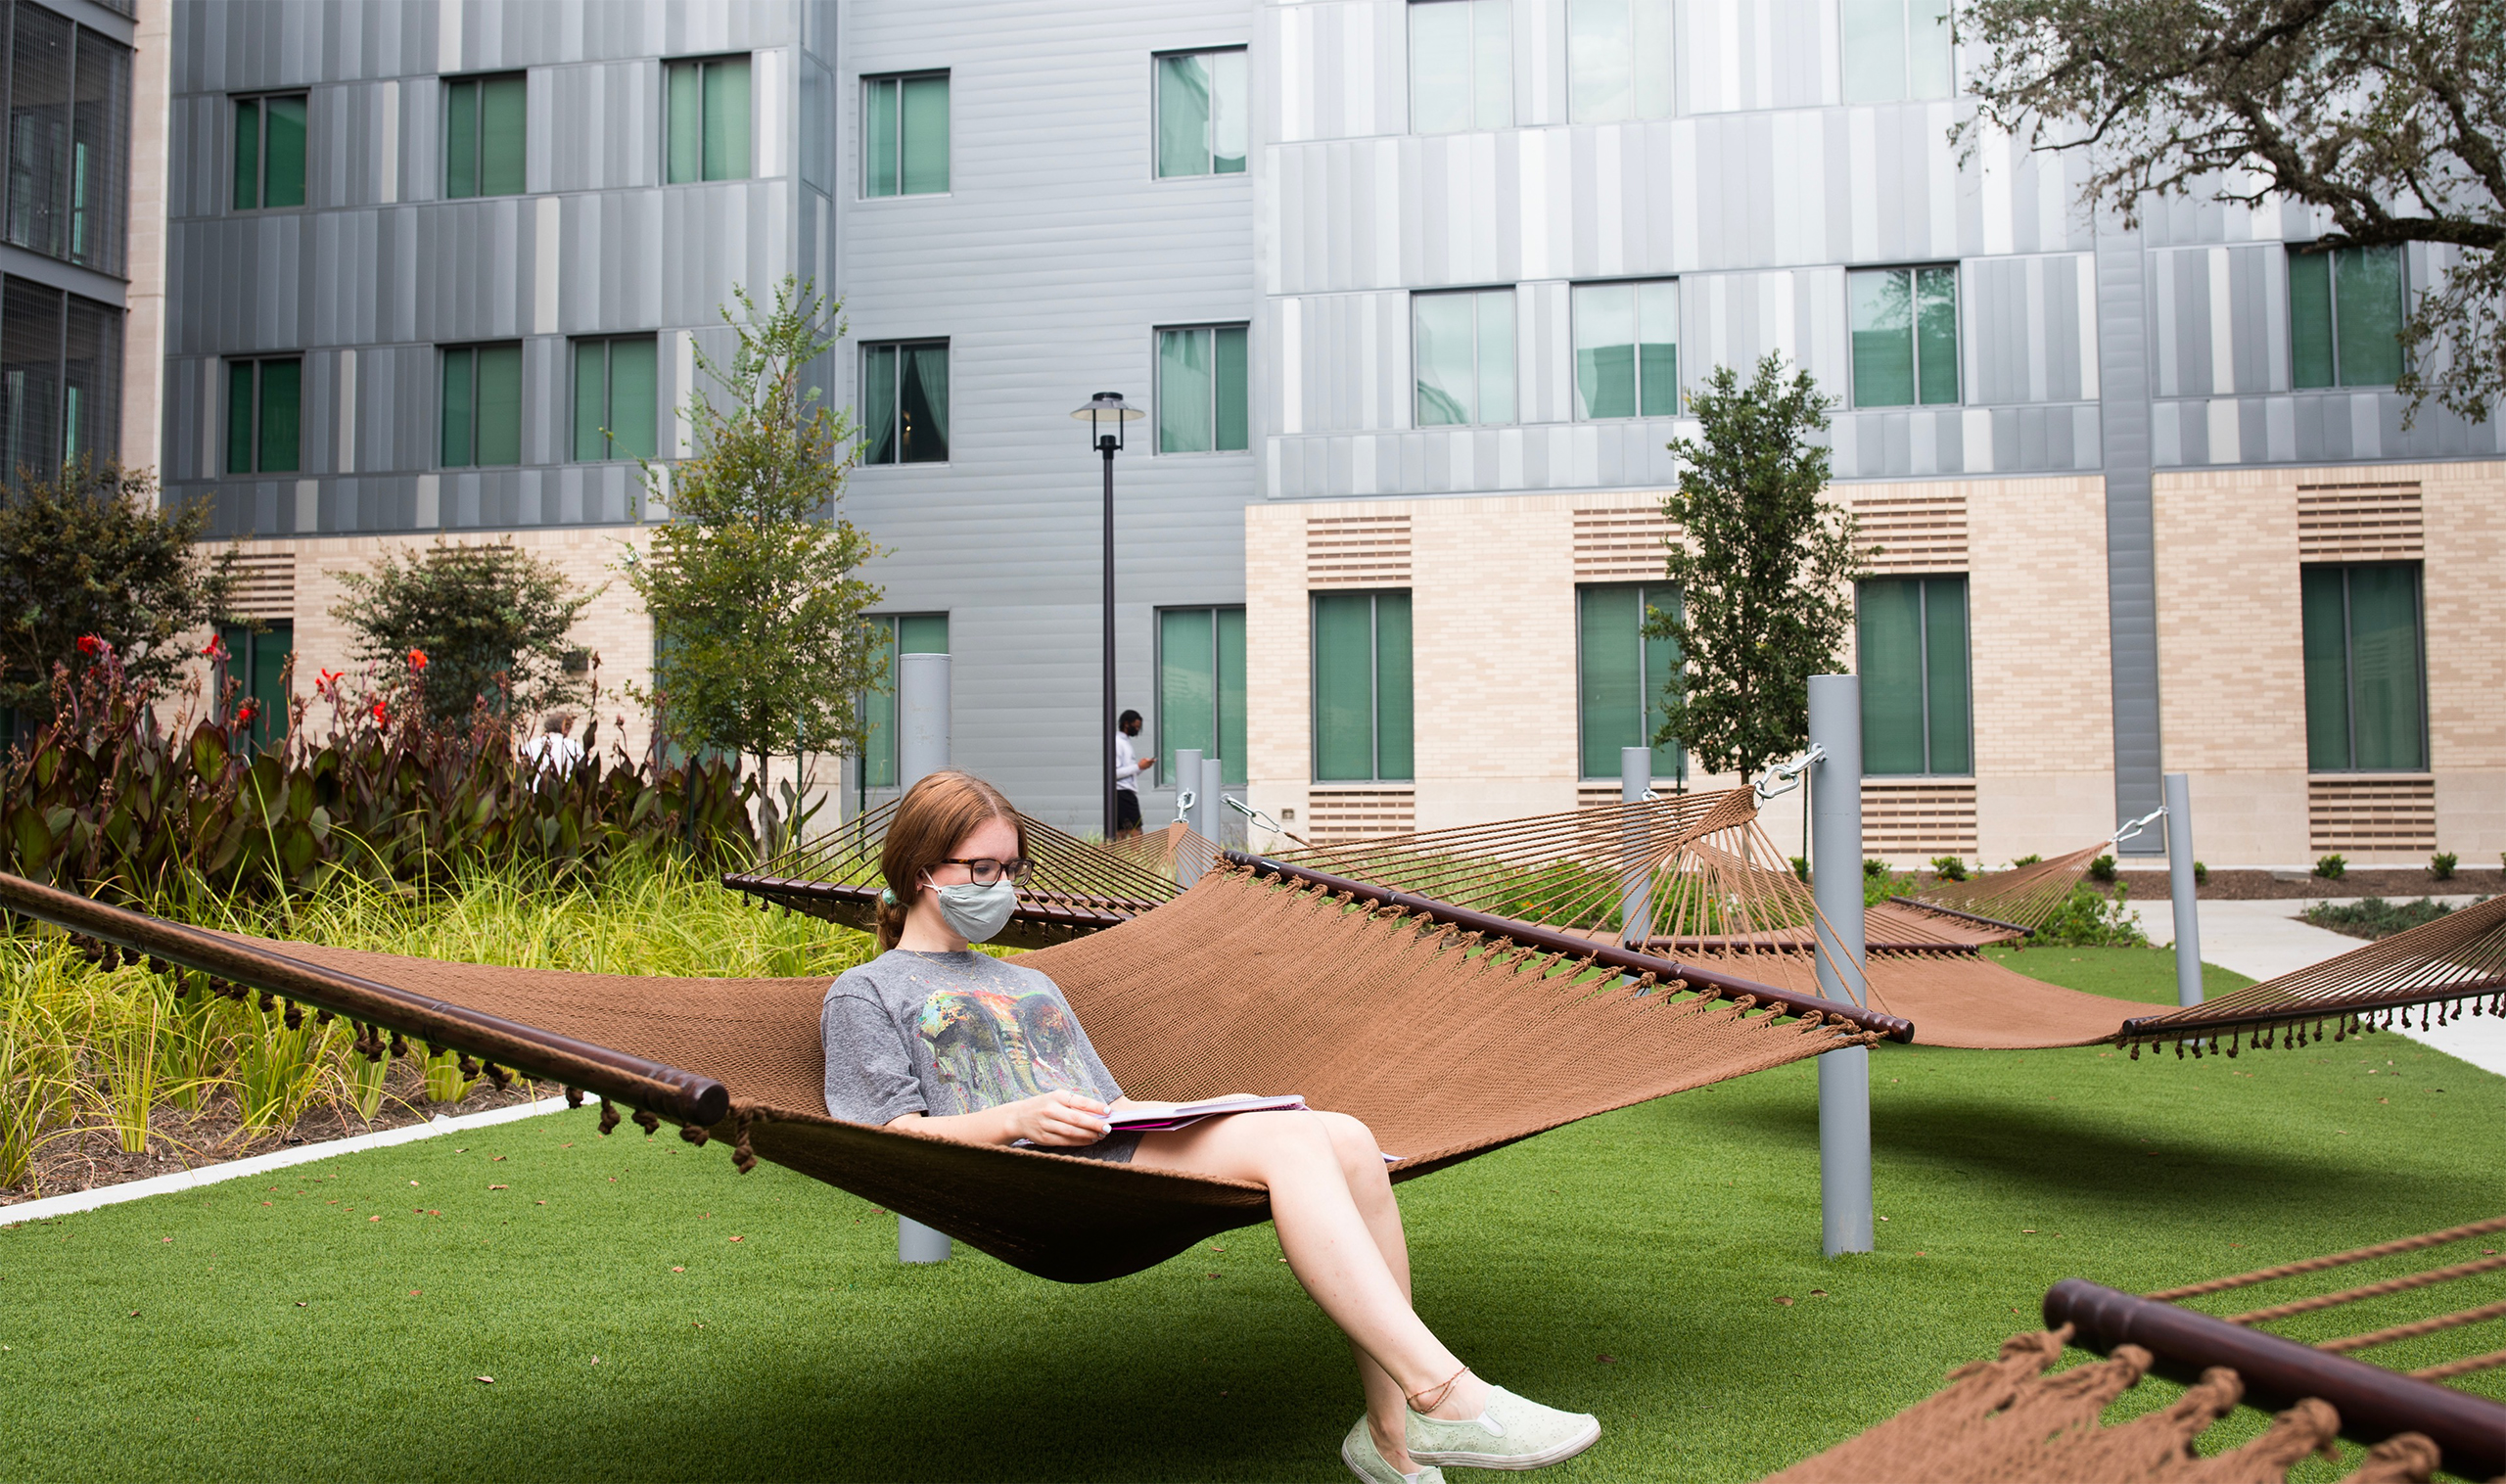 Student sitting on hammock in quad, residential housing